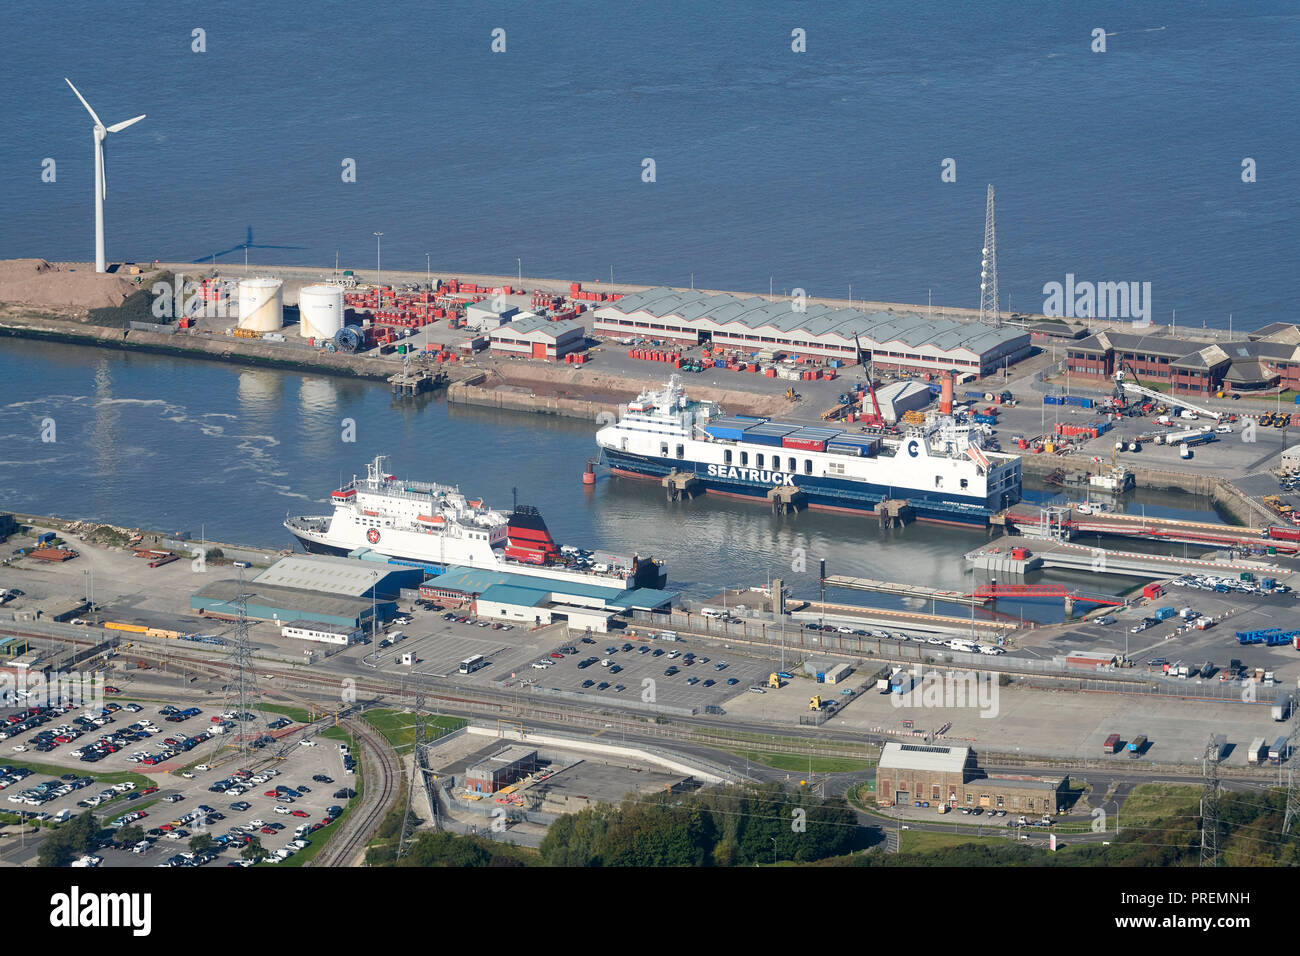 An aerial photo of Heysham Port, north west England, UK, on the edge of Morecambe bay, Isle of Man ferry in port Stock Photo